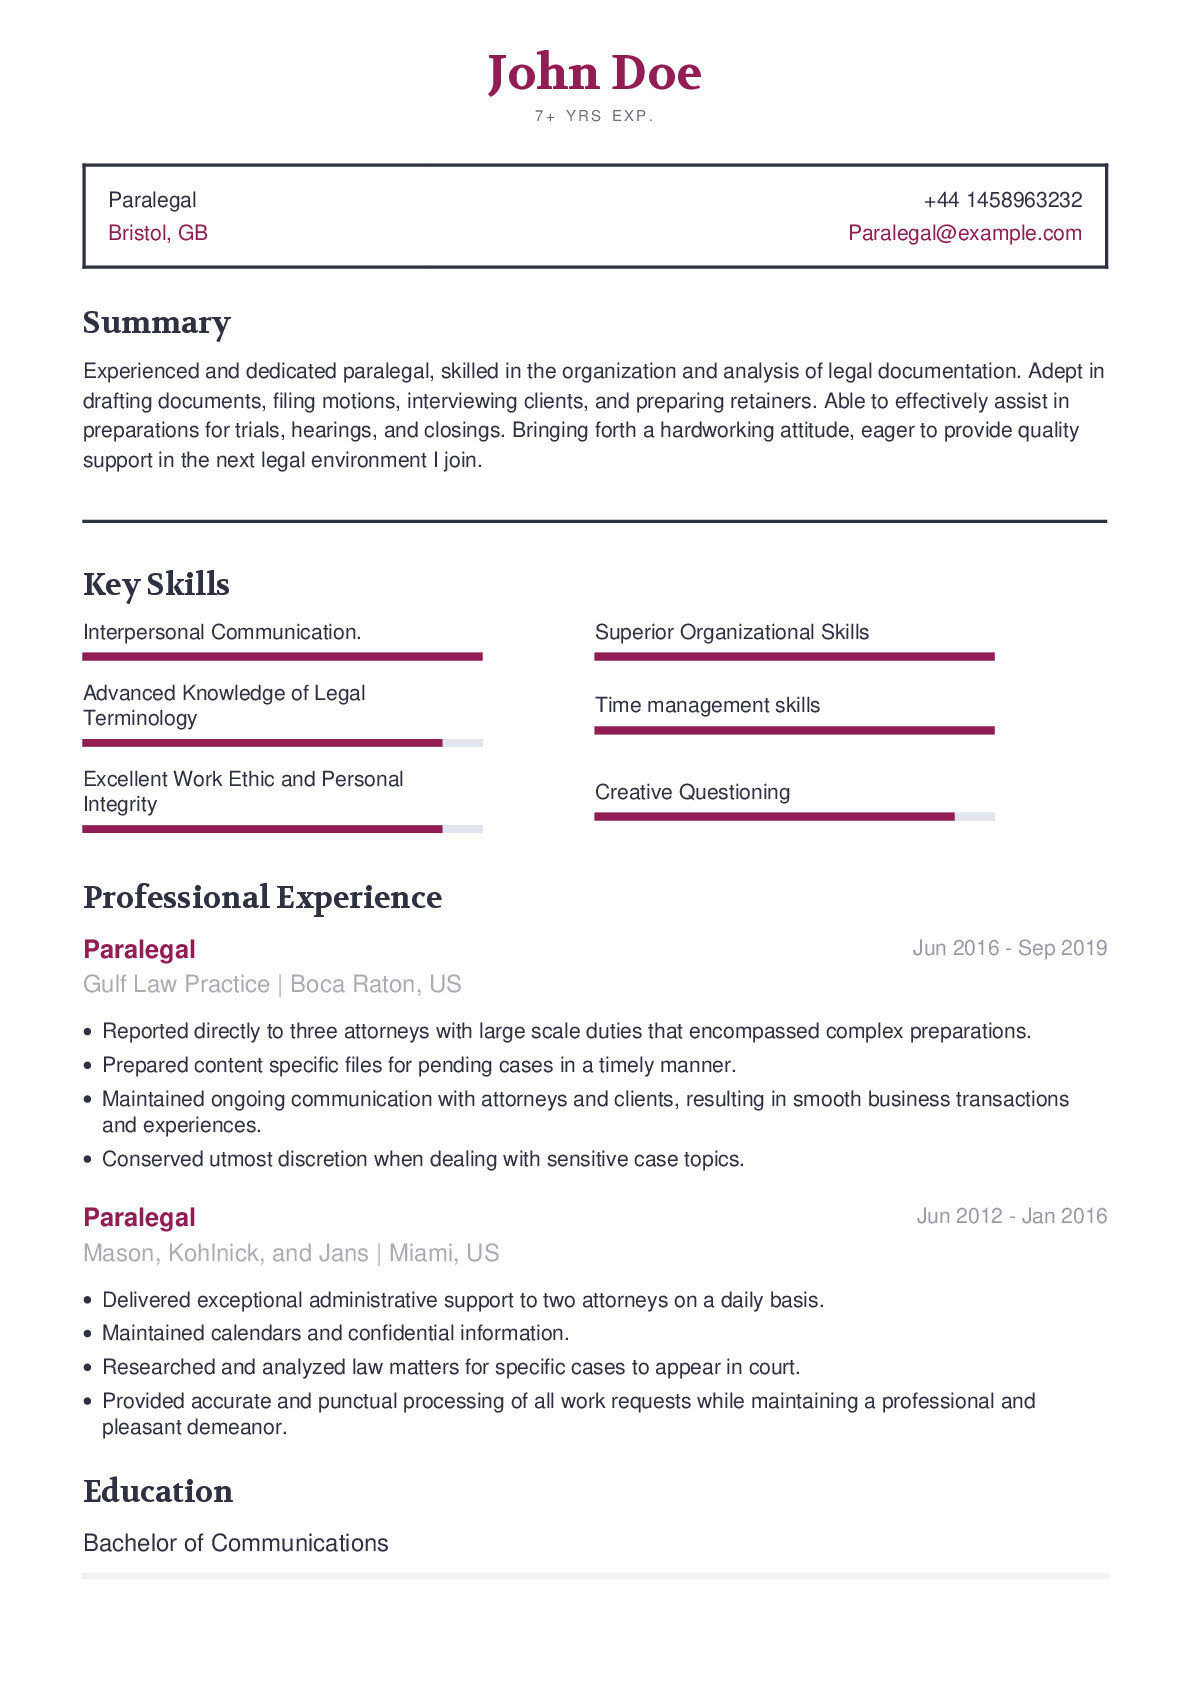 Sample Of A Good Objective for A Resume for Paralegal Paralegal Resume Example with Content Sample Craftmycv